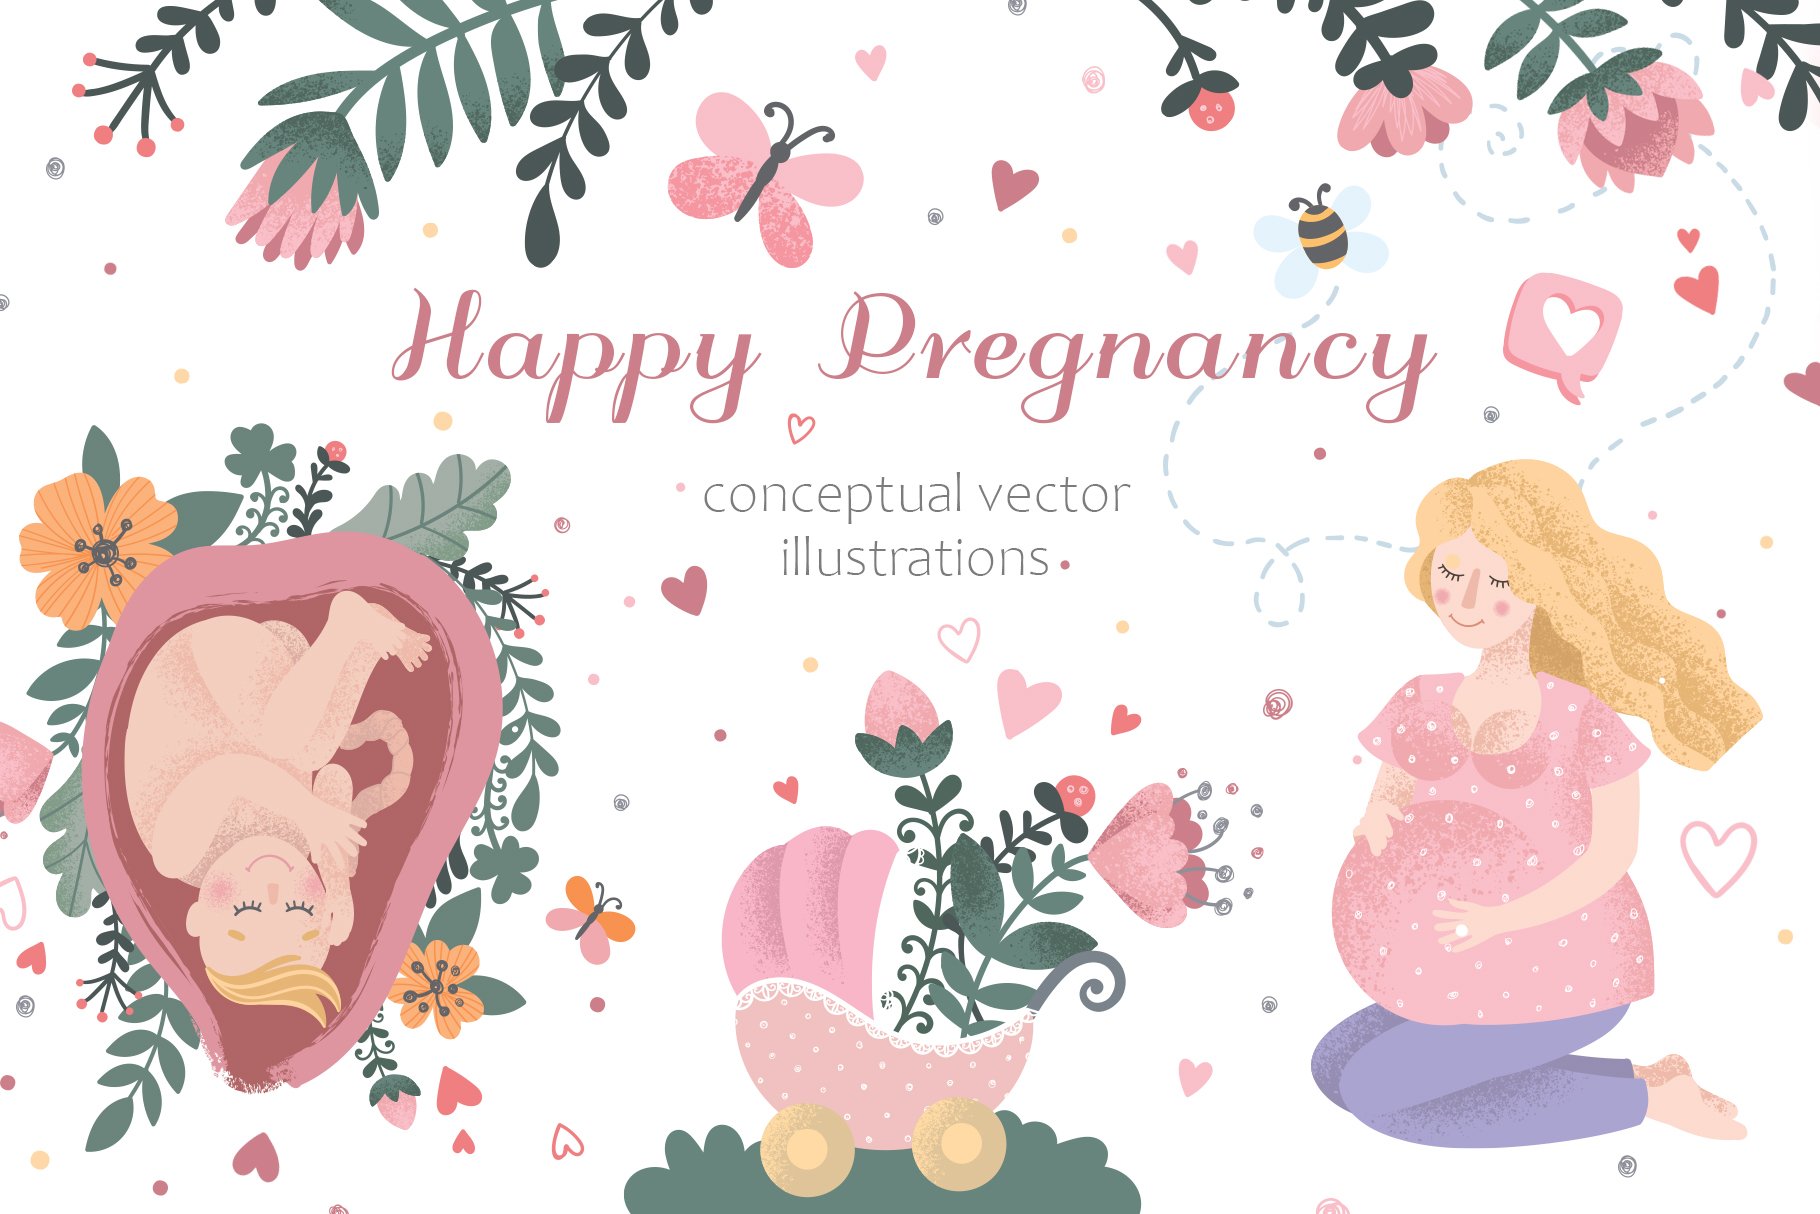 Happy pregnancy illustrations cover image.